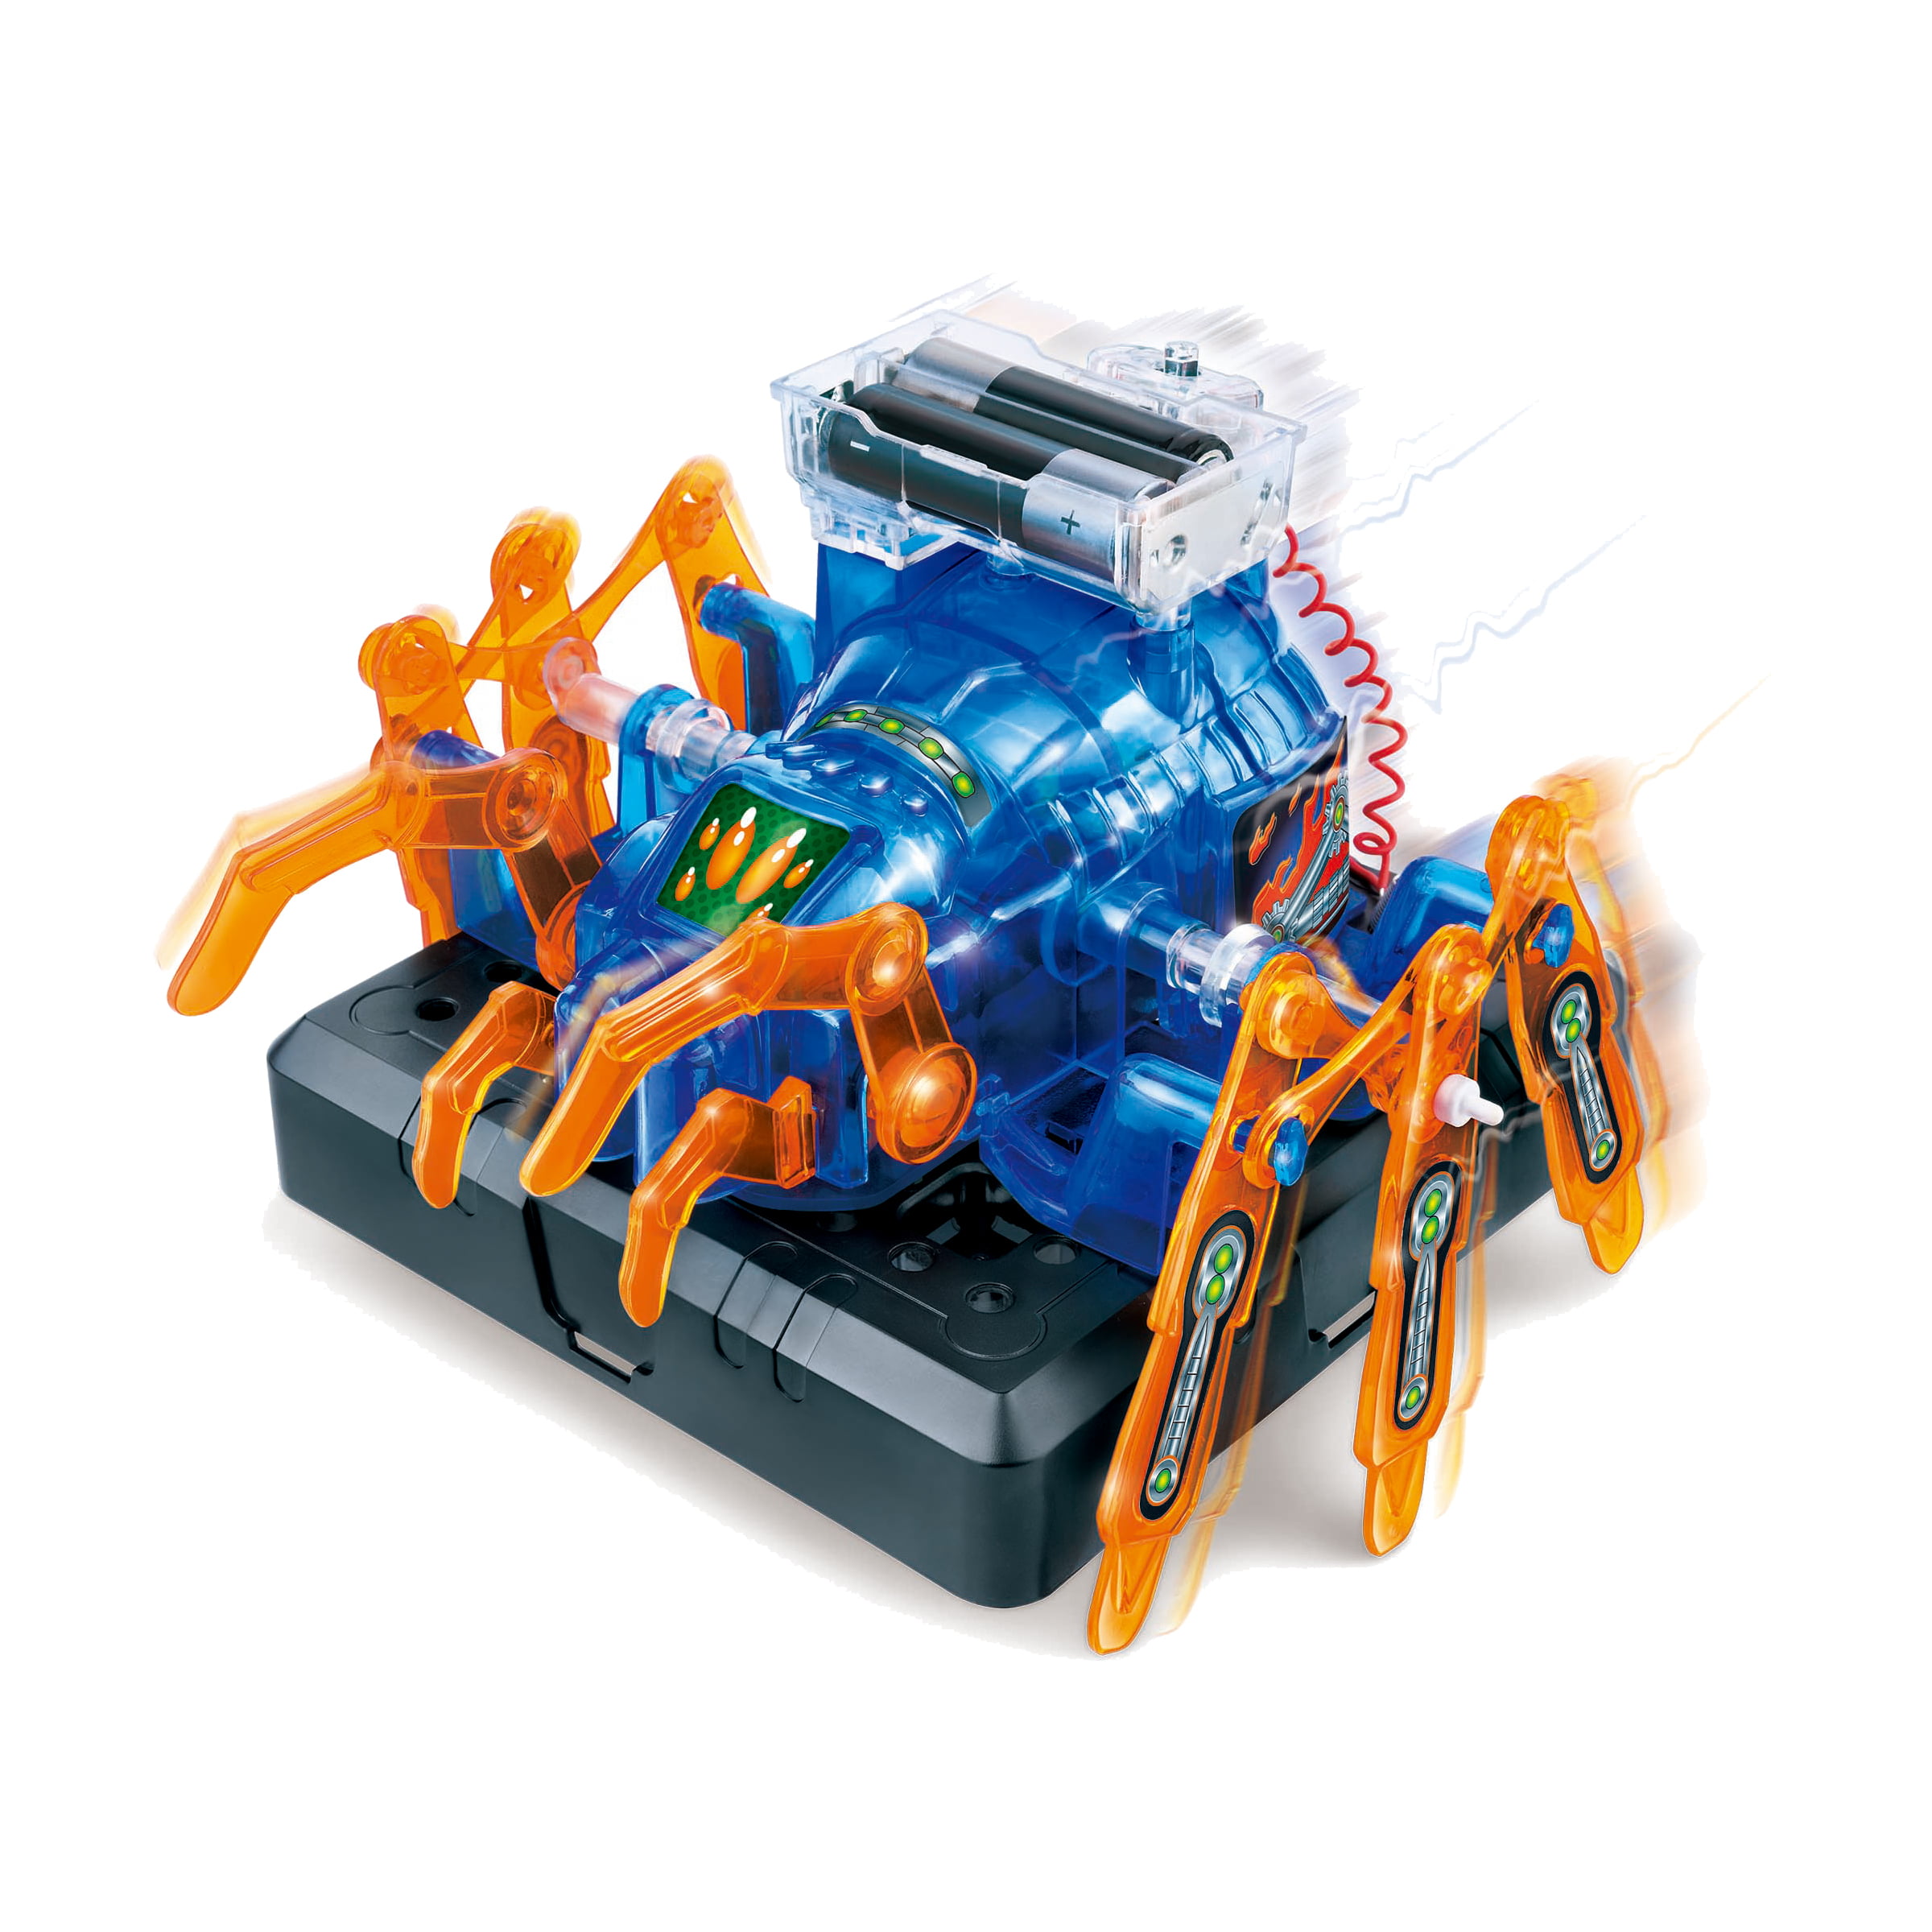 Robotic Spider Connex Build Yourself Engineering Science KIt Age 8 With App 